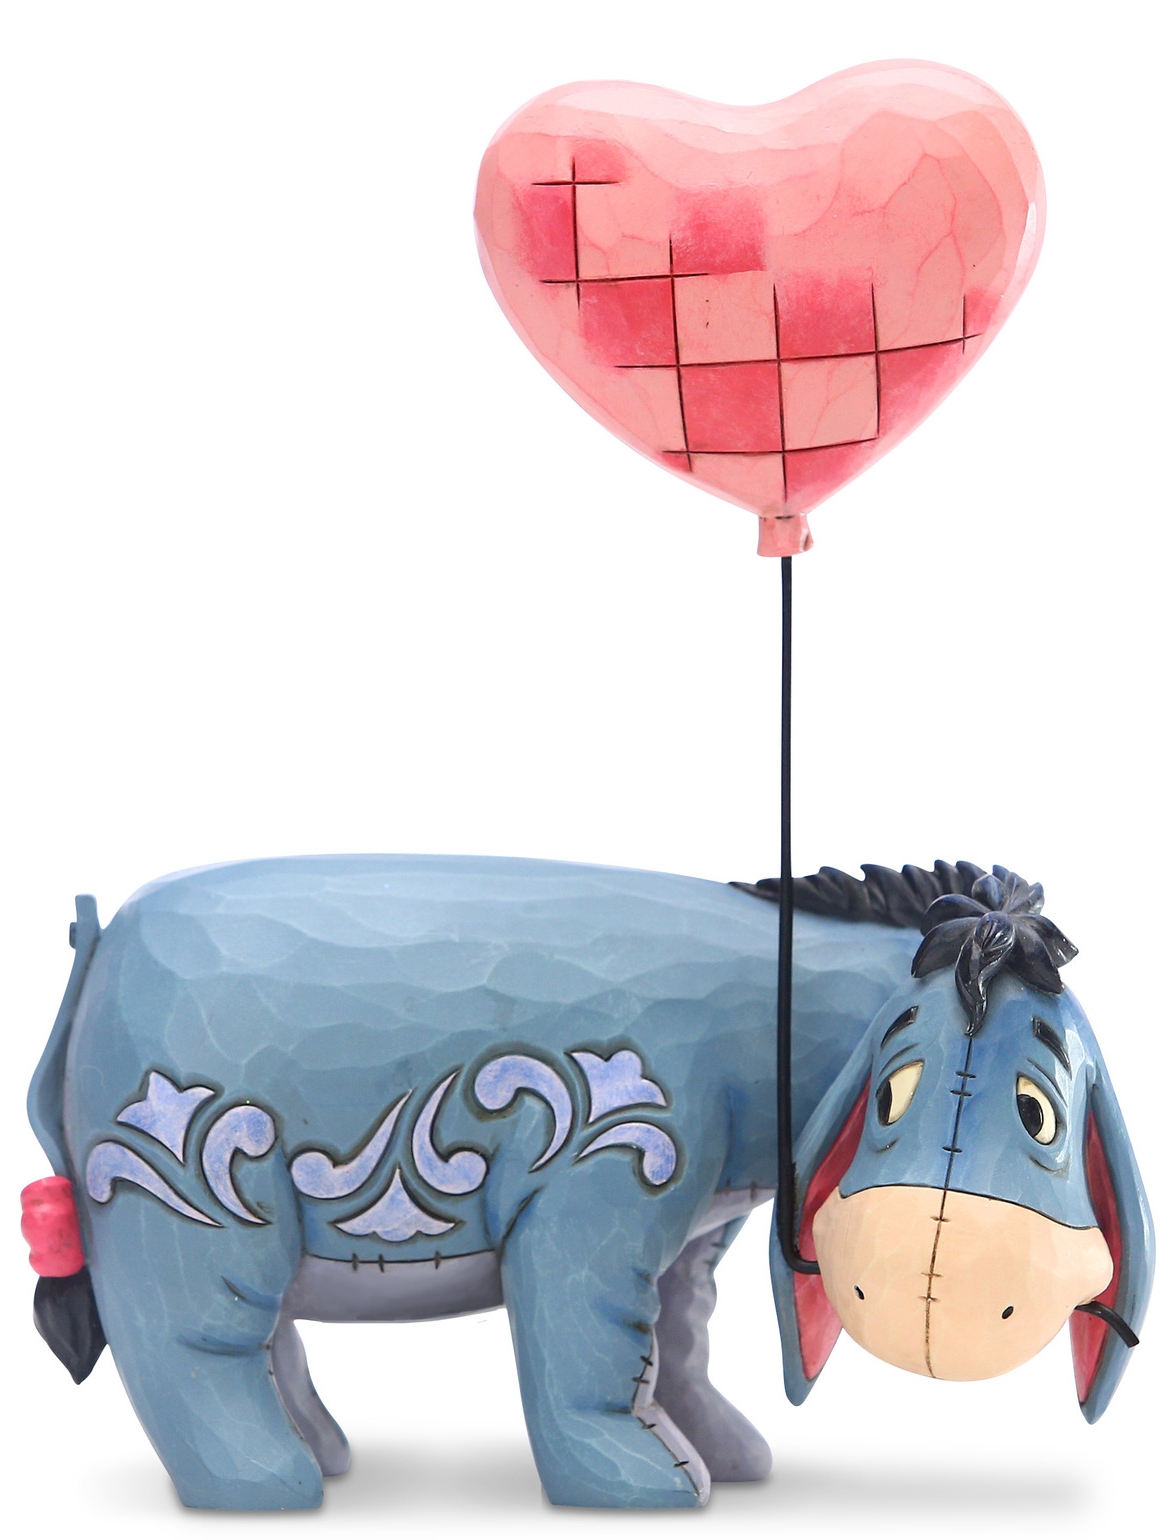 Disney Traditions by Jim Shore 6005965 Eeyore with a Heart Ball Figurine